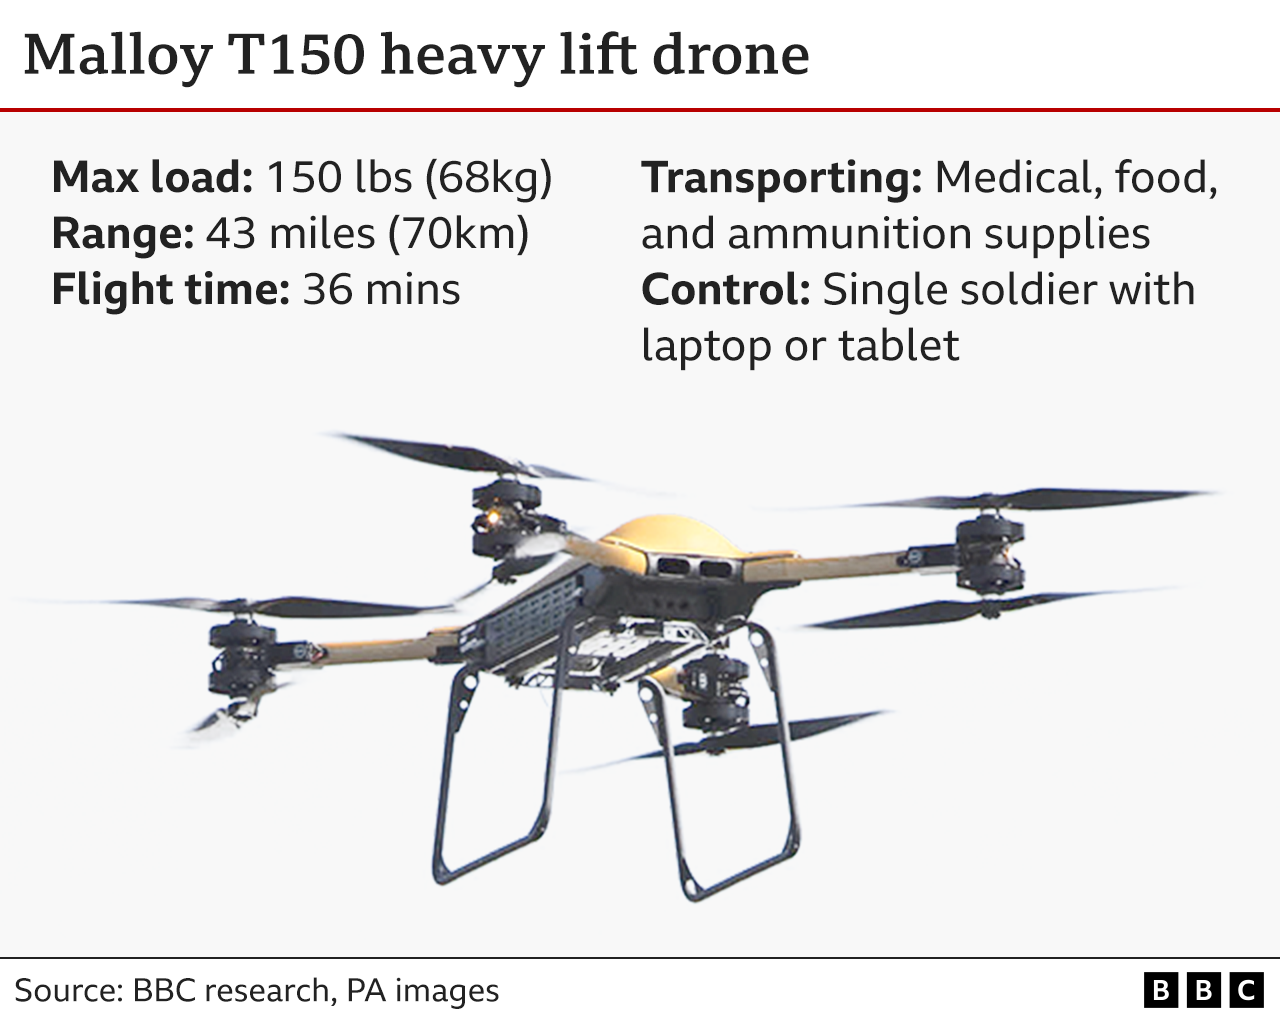 Graphic showing T150 Malloy heavy lift drones